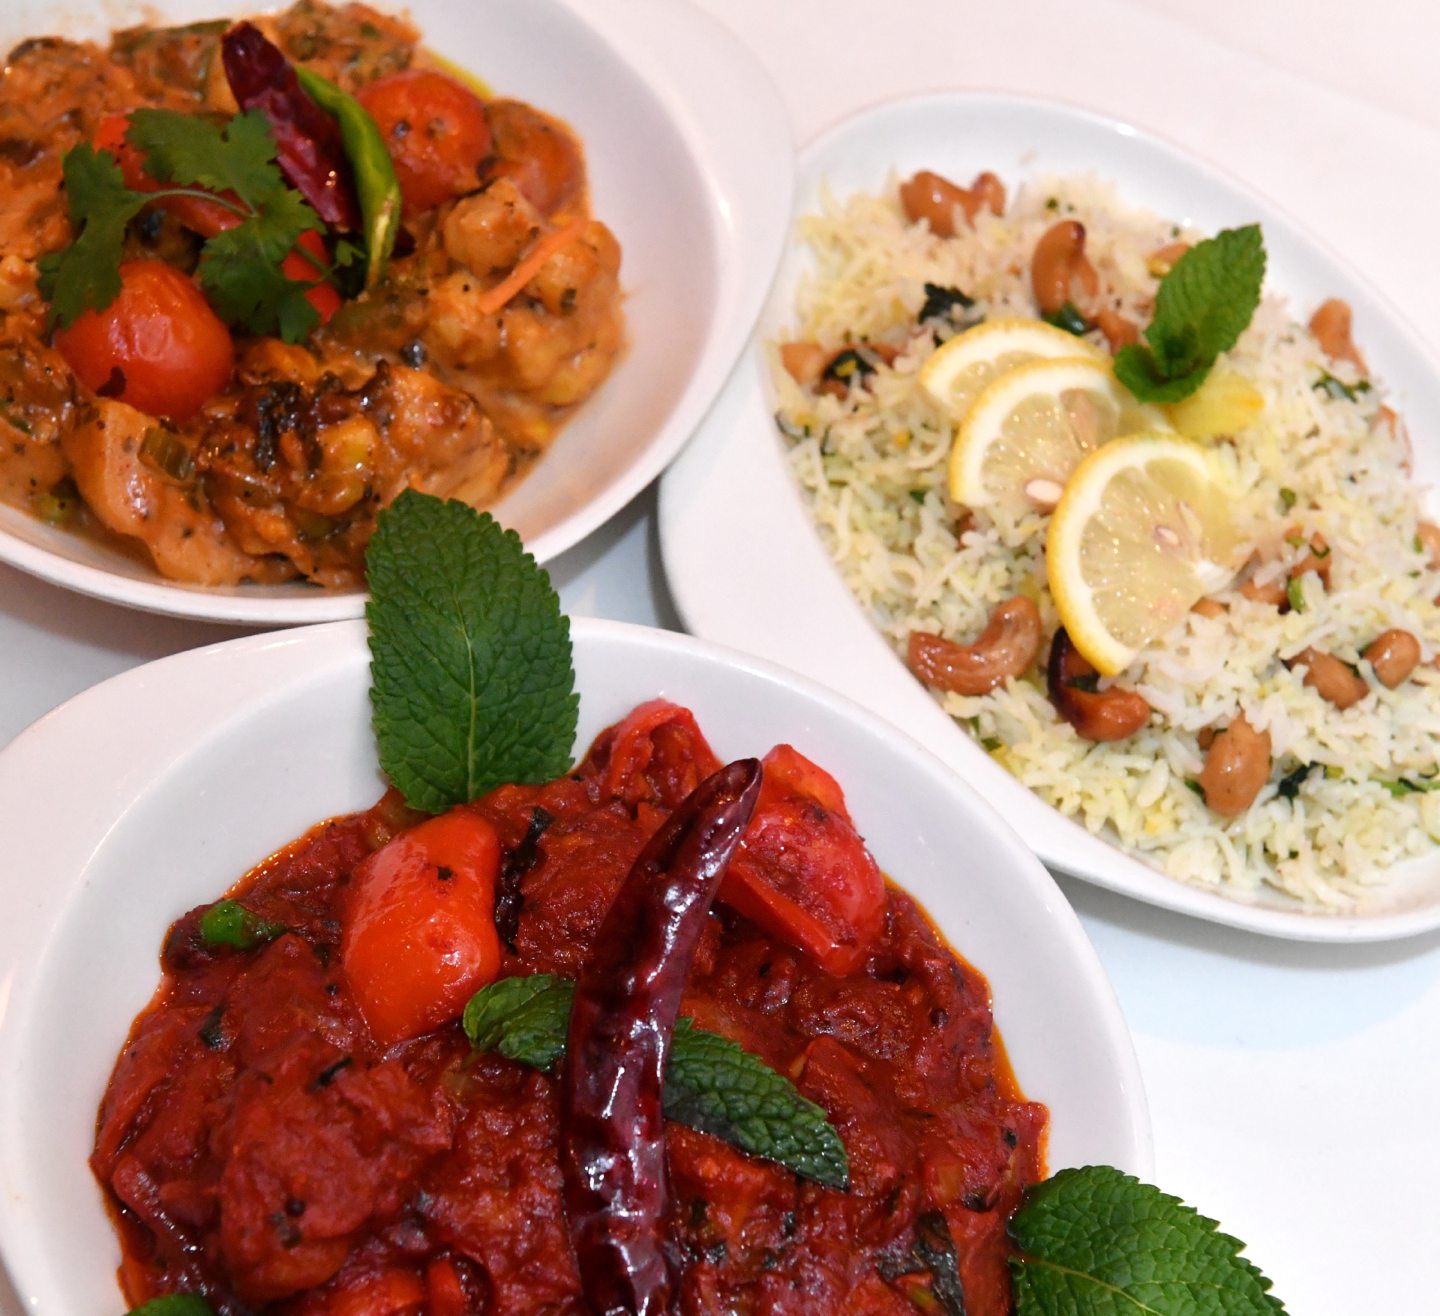 South Indian vegetarian curry, Lamb naga zhal and lemon and cashew rice dishes